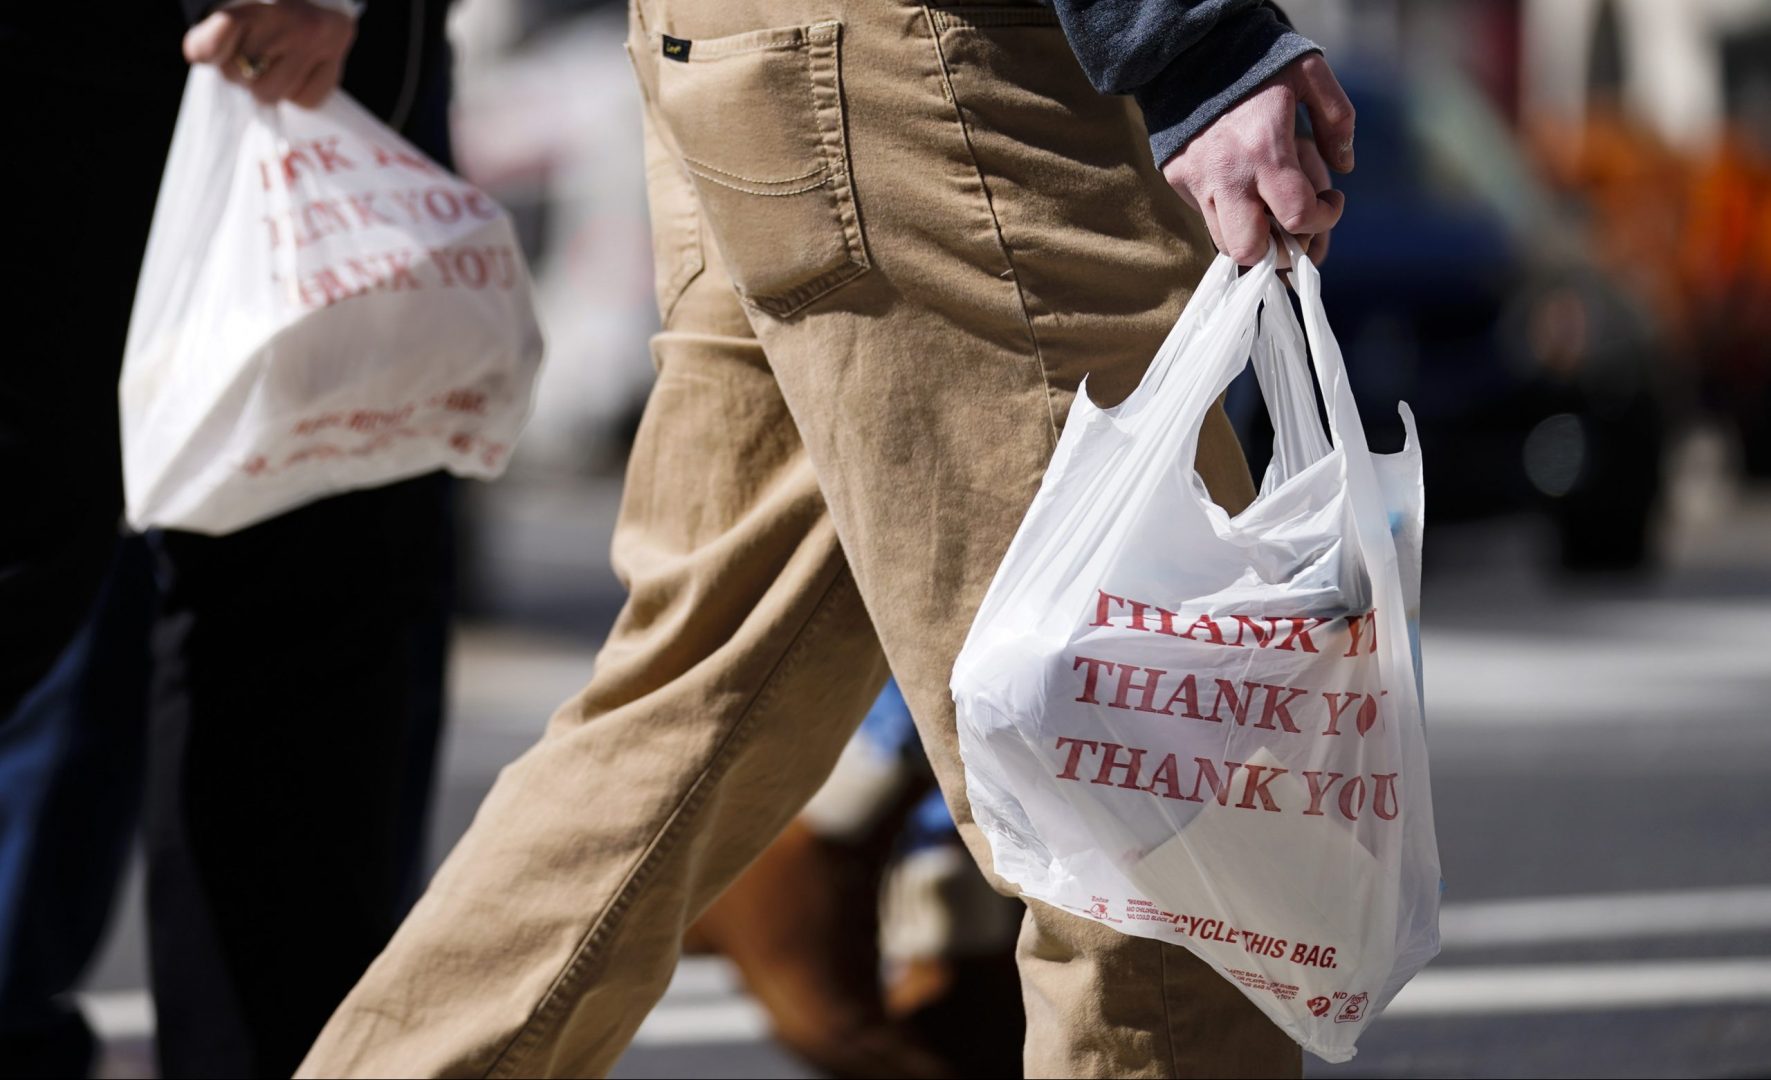 Pedestrians carry plastic bags in Philadelphia, Wednesday, March 3, 2021. Philadelphia and three other municipalities in Pennsylvania sued the state over what they say was a covert abuse of legislative power to temporarily halt local bans or taxes on plastic bags handed out to customers by retailers.